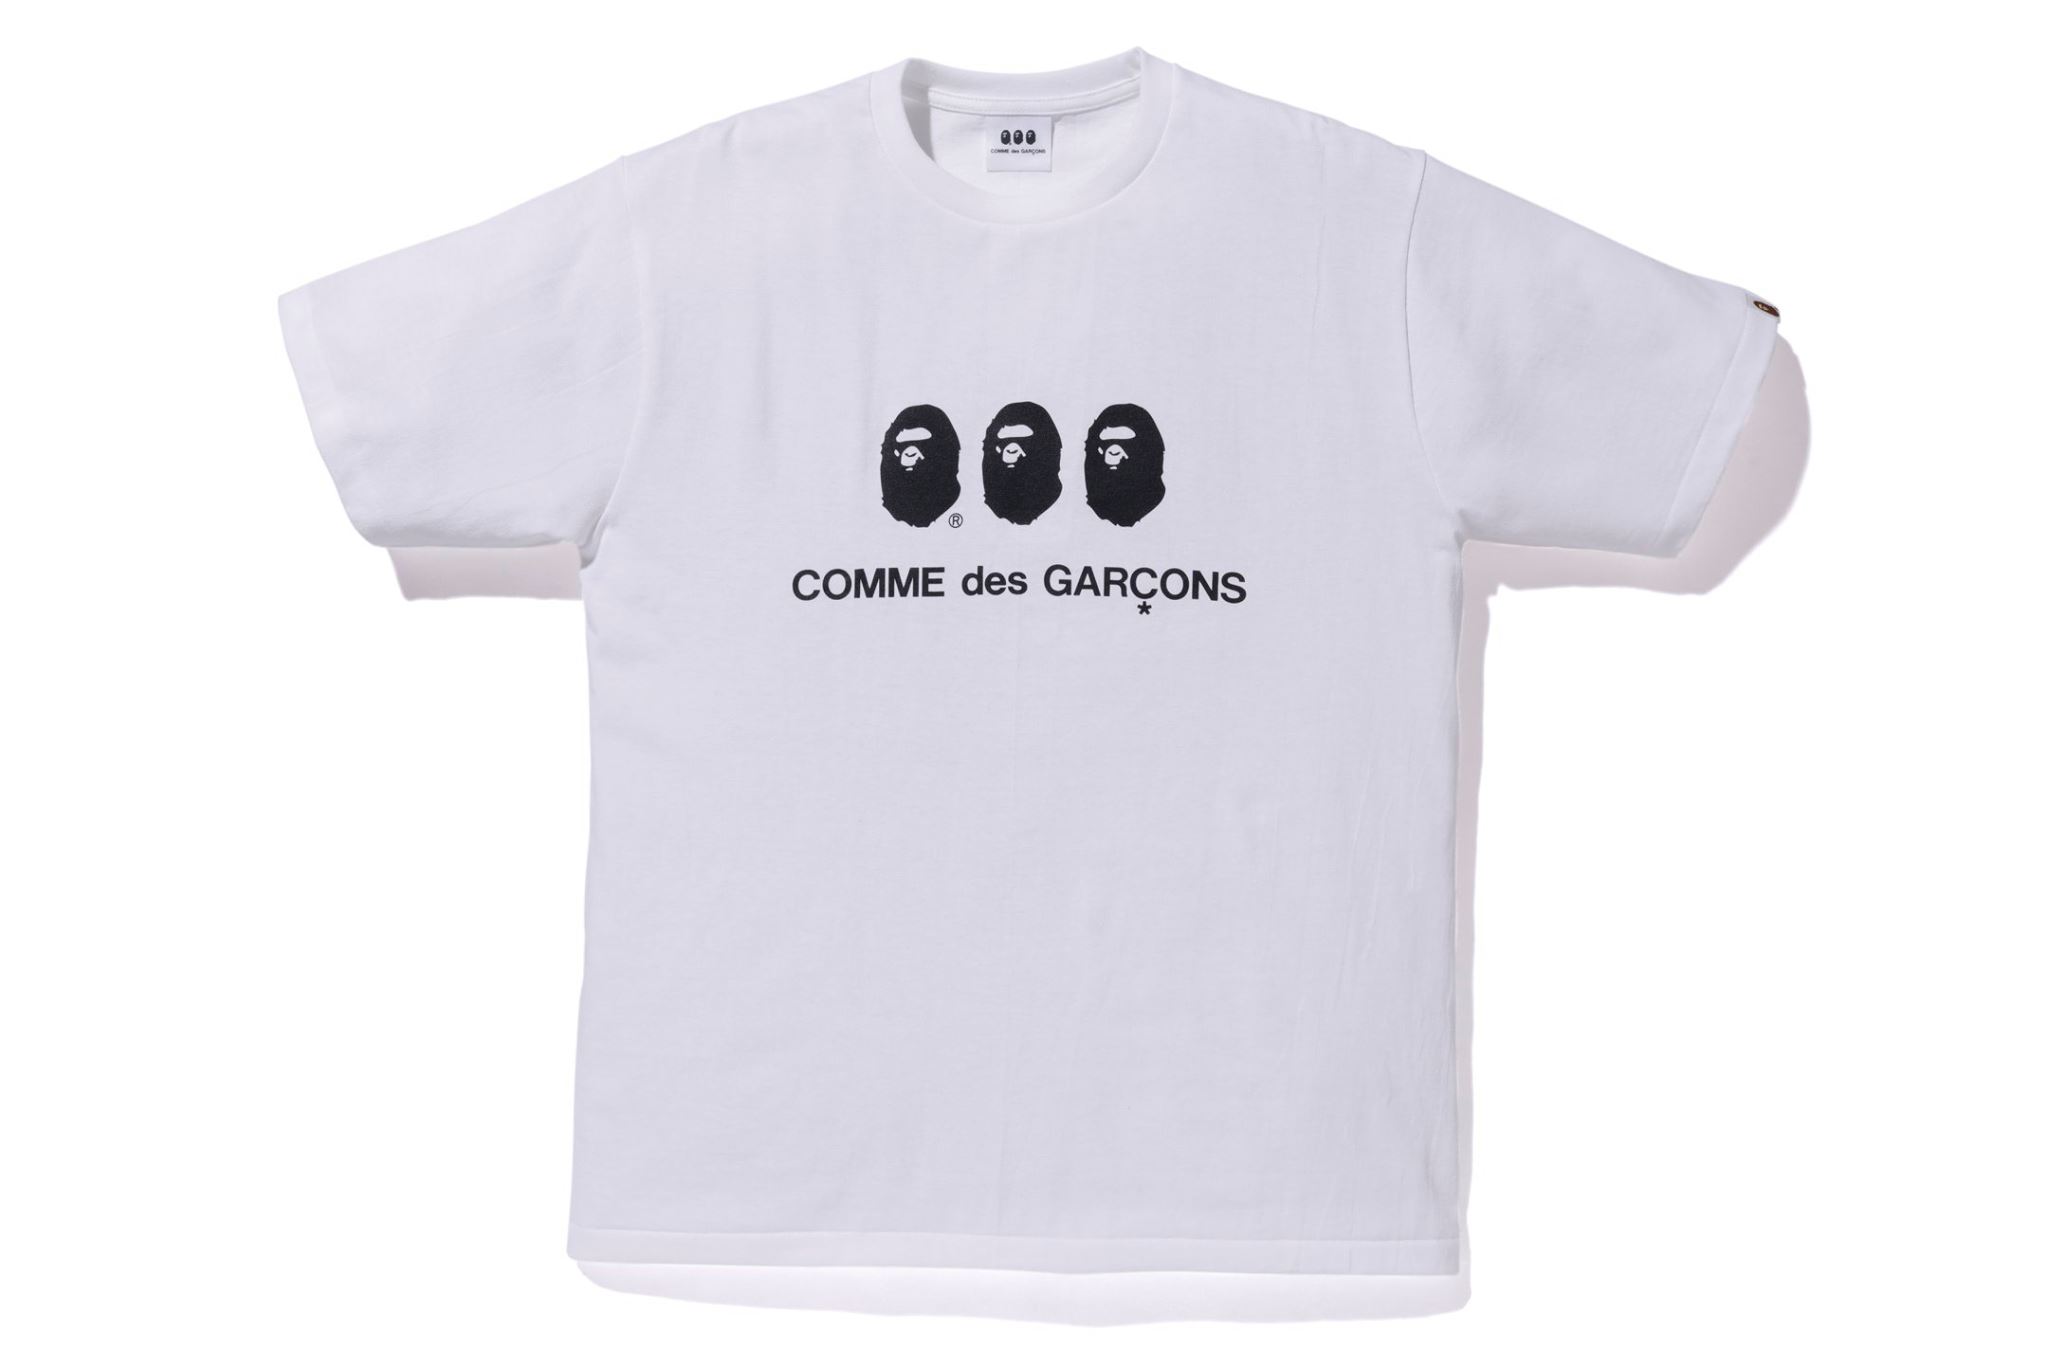 BAPE and COMME des GARÇONS Team Up on New Collection